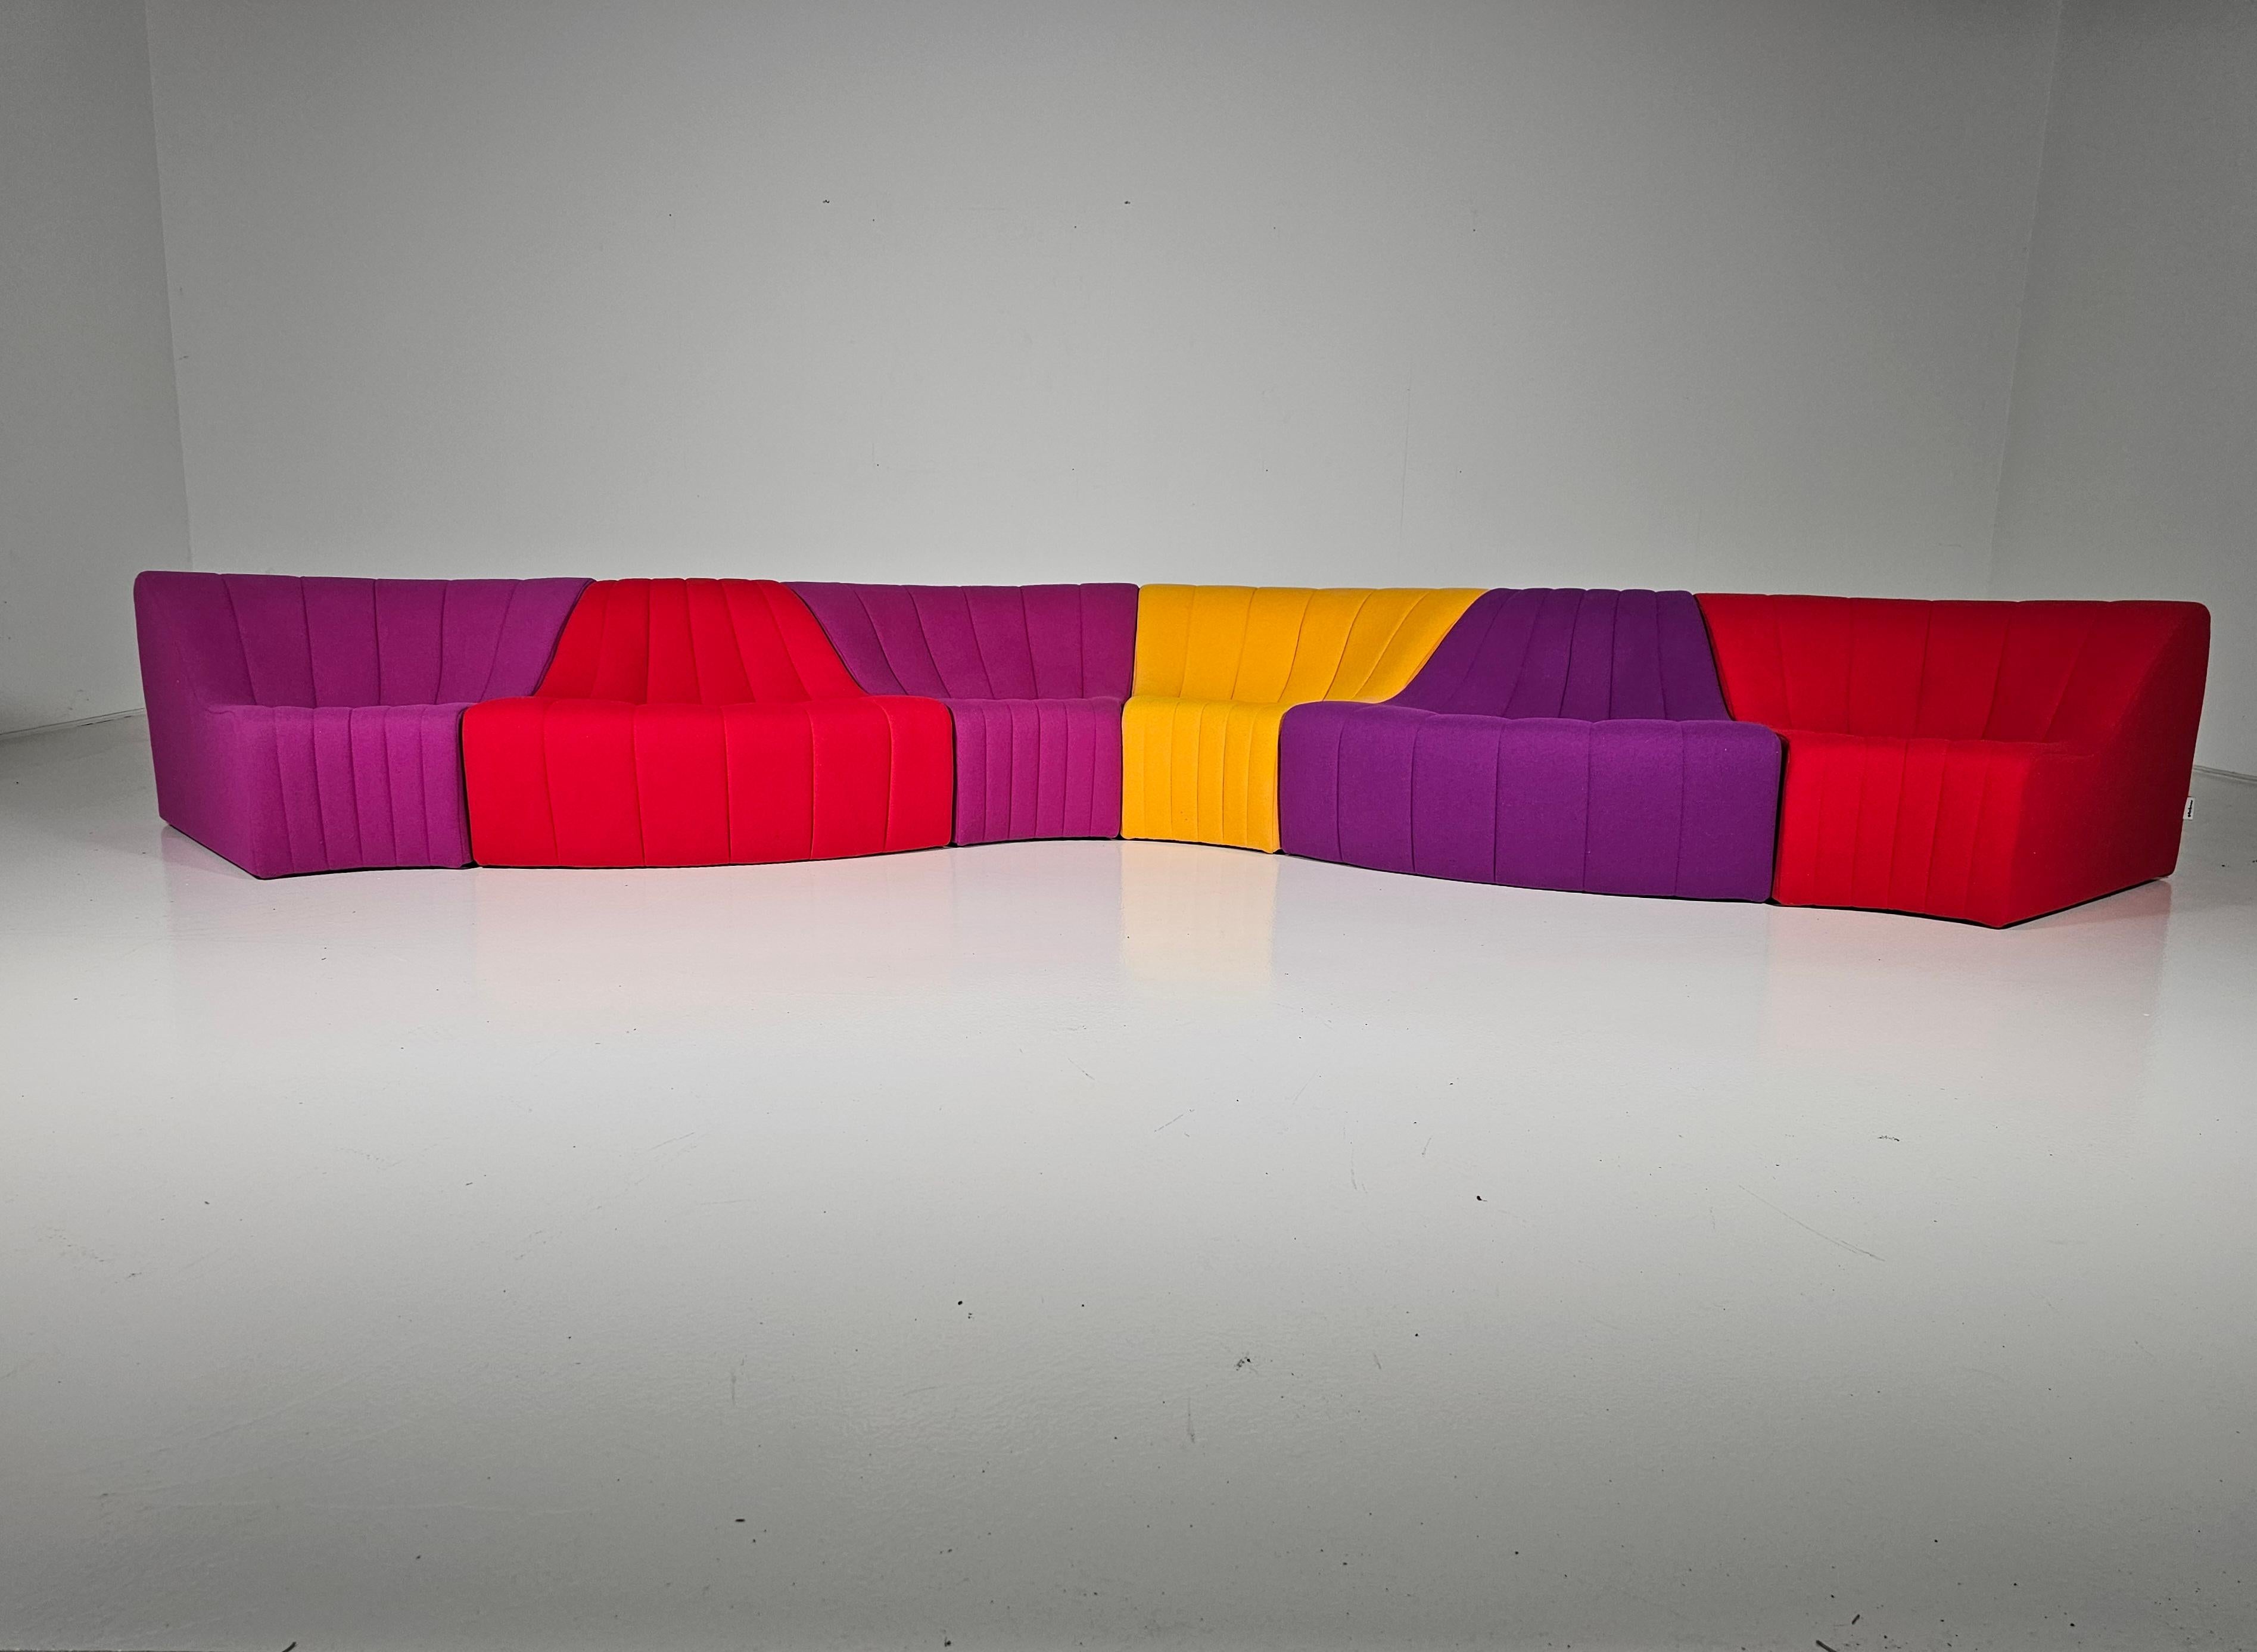 Late 20th Century Kwok Hoi Chan 'Chromatic'  modular sofa in red, purple and yellow colors 